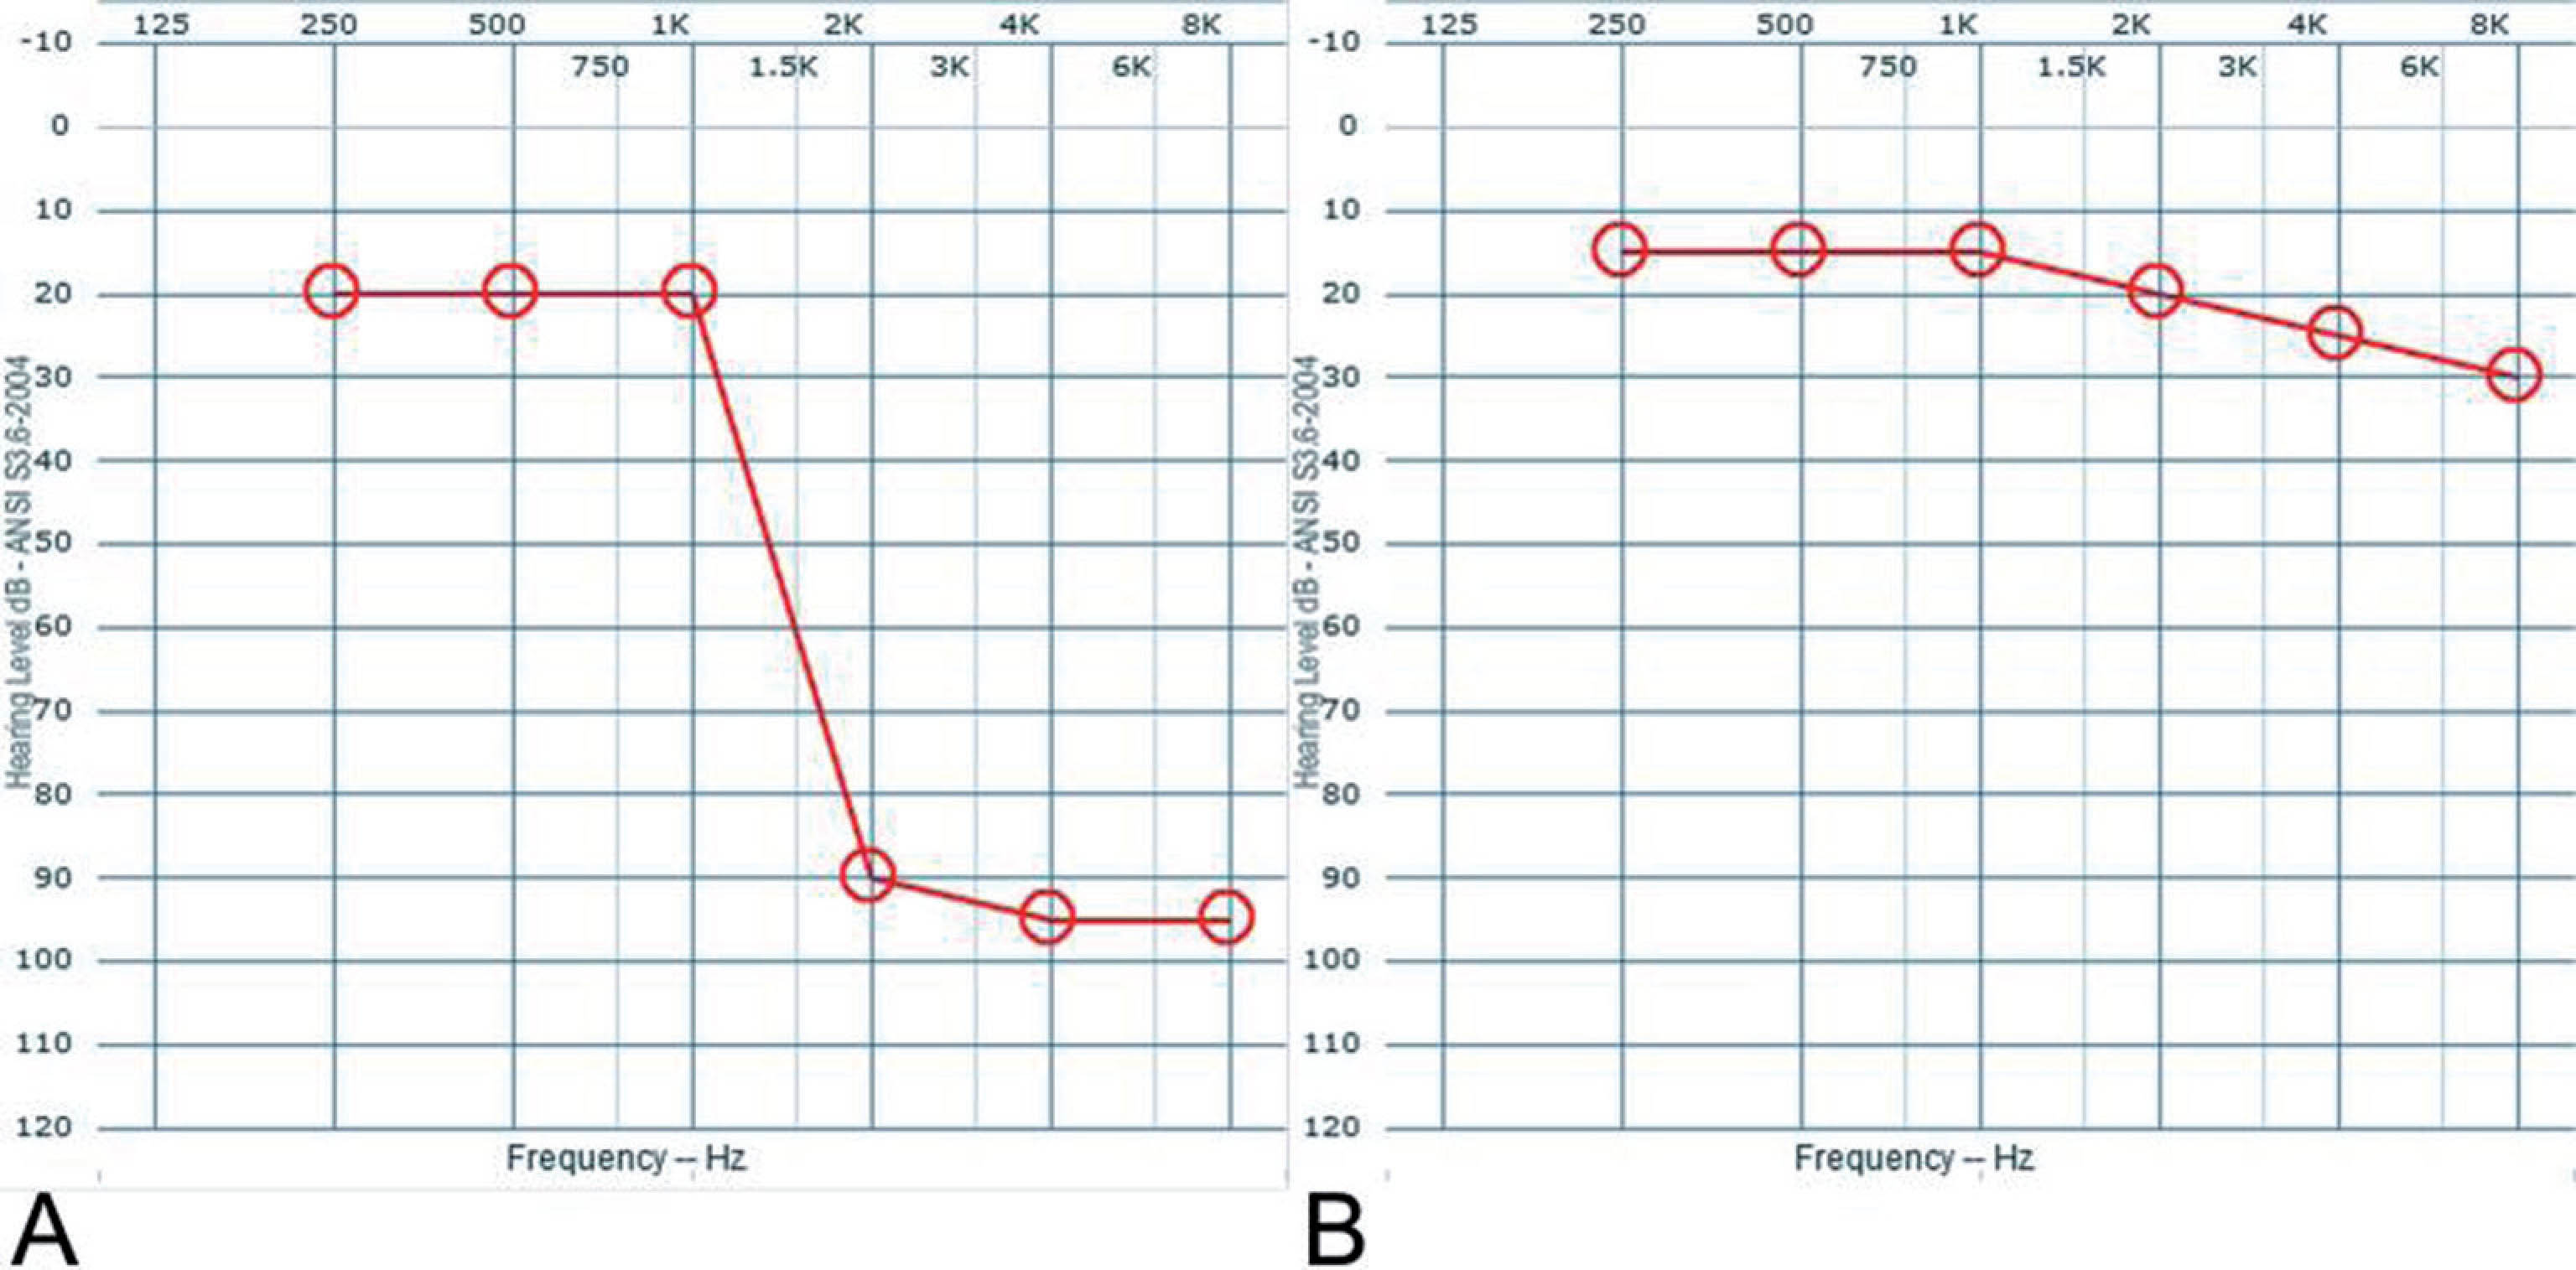 Right-ear pure tone audiograms. A – Initial audiogram; B – Post-treatment audiogram showing complete recovery of normal hearing levels.